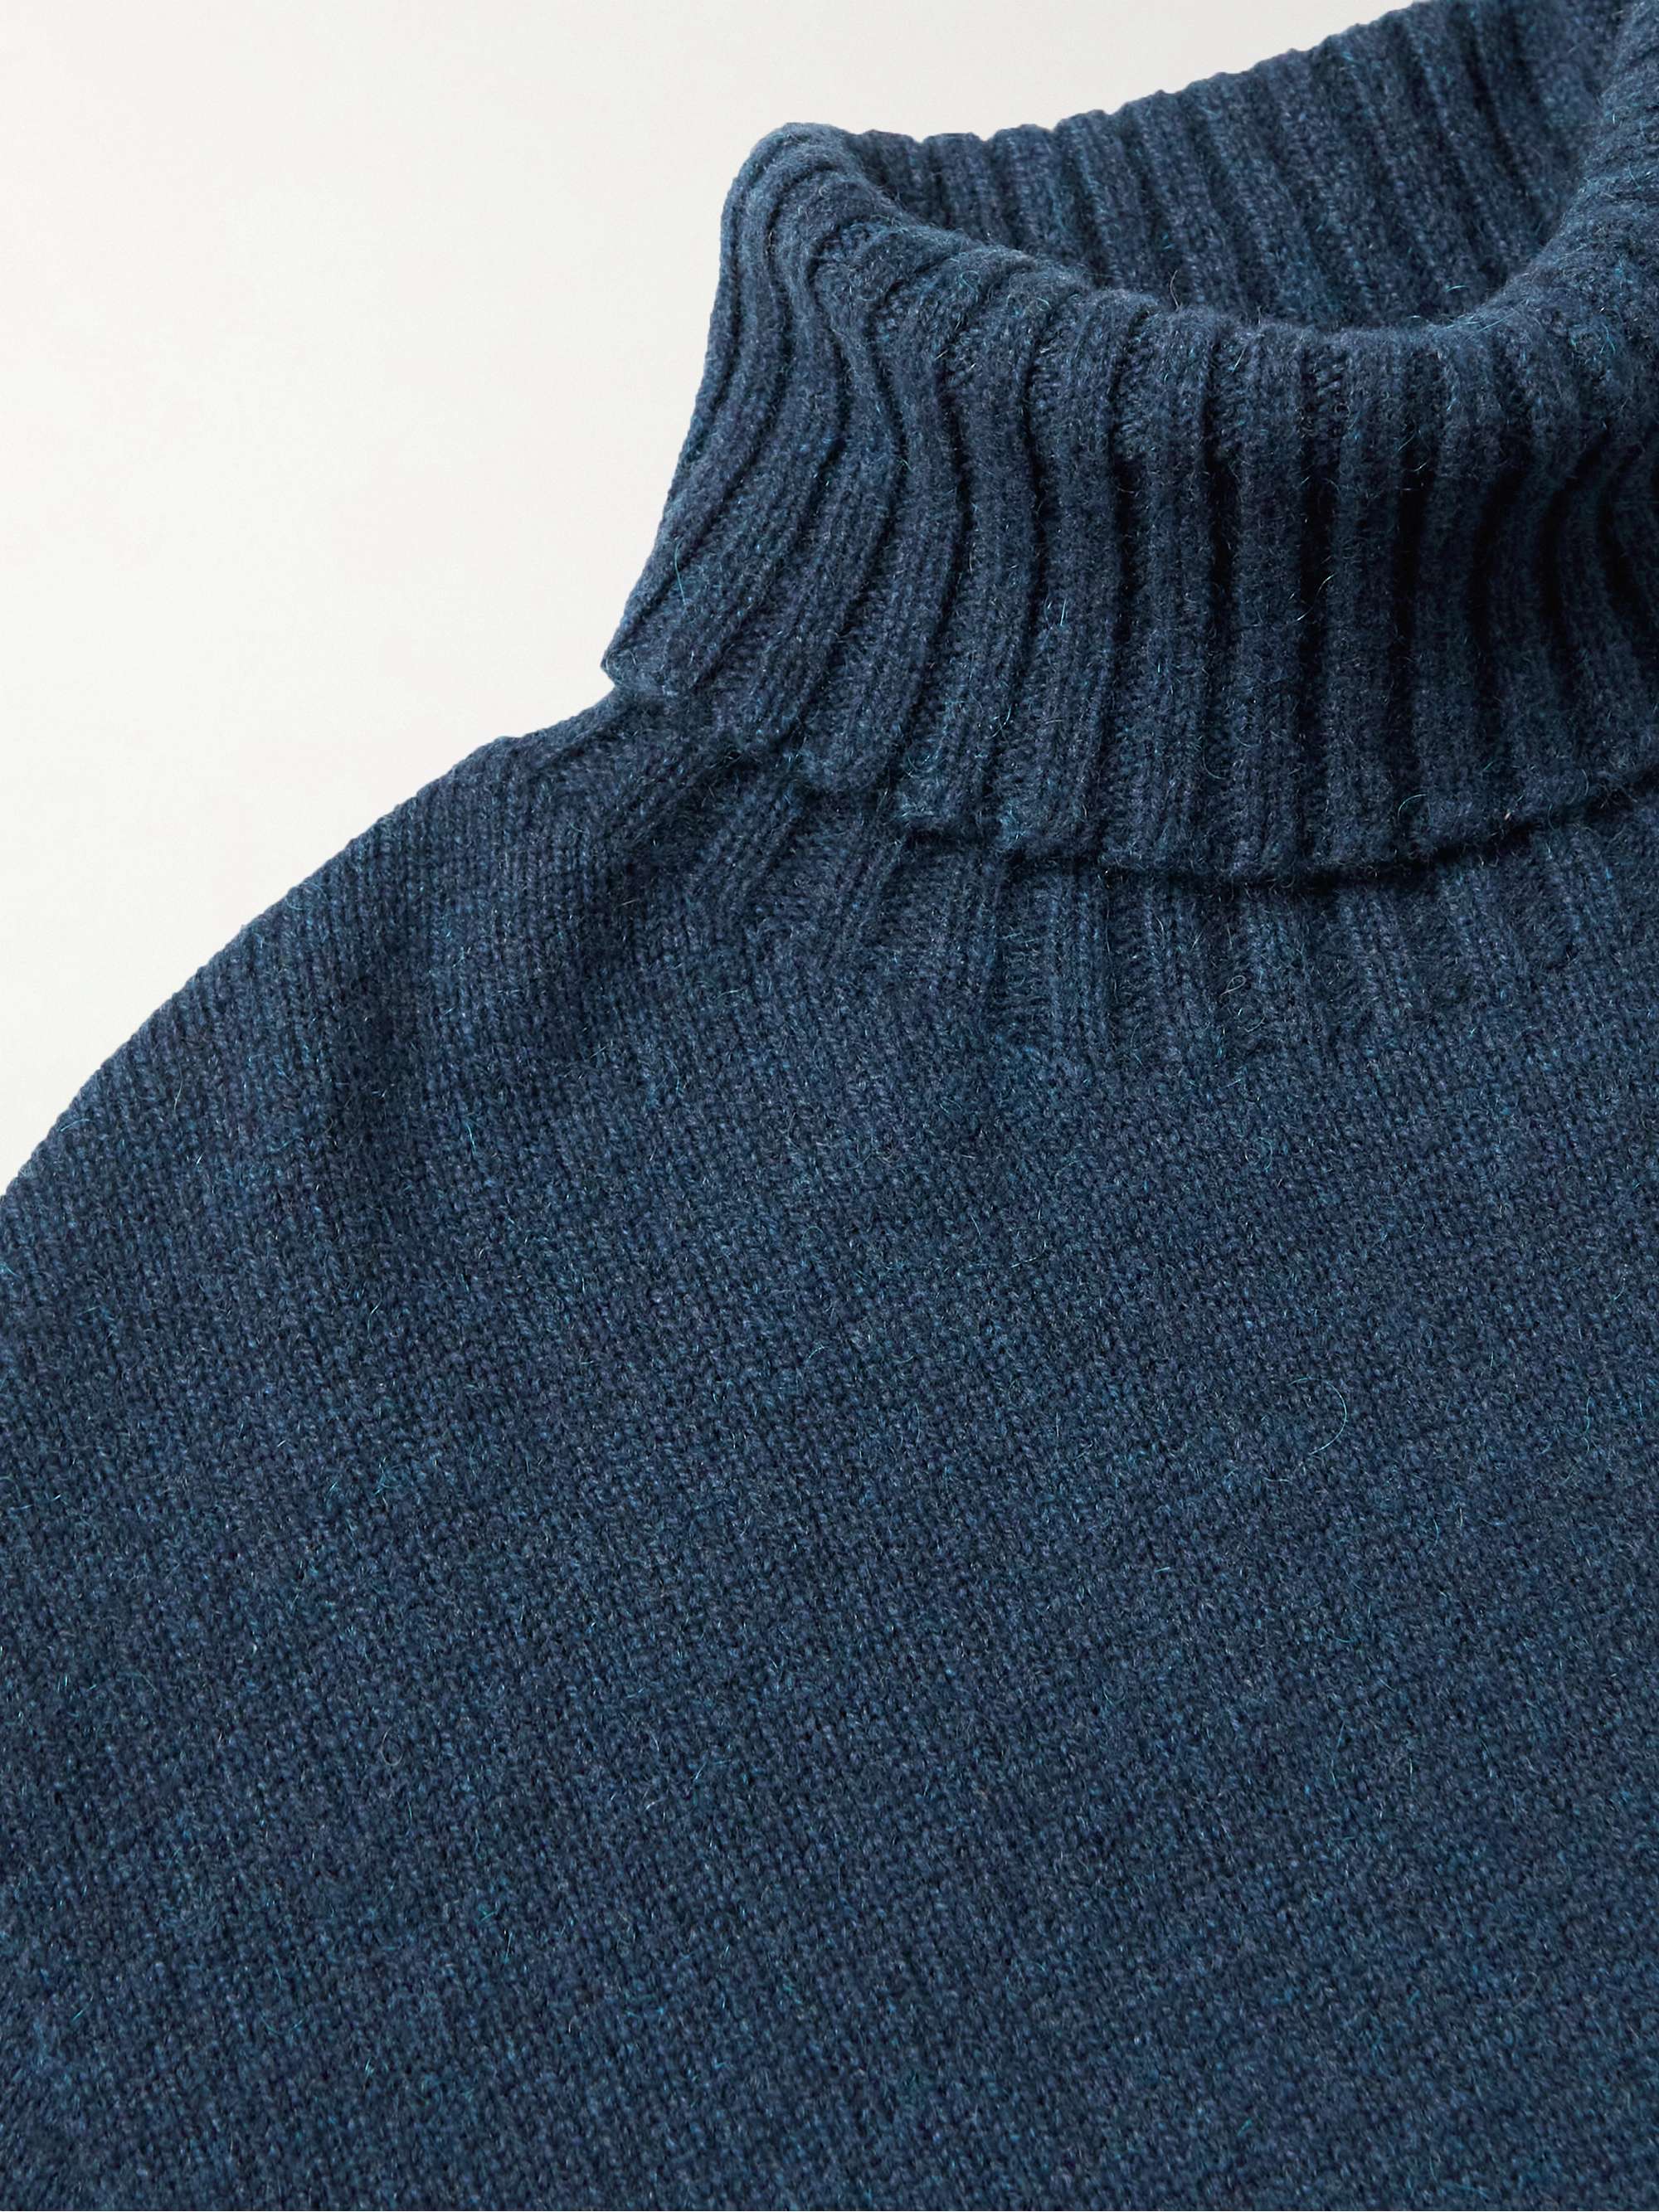 ALTEA Cashmere, Mohair and Wool-Blend Rollneck Sweater